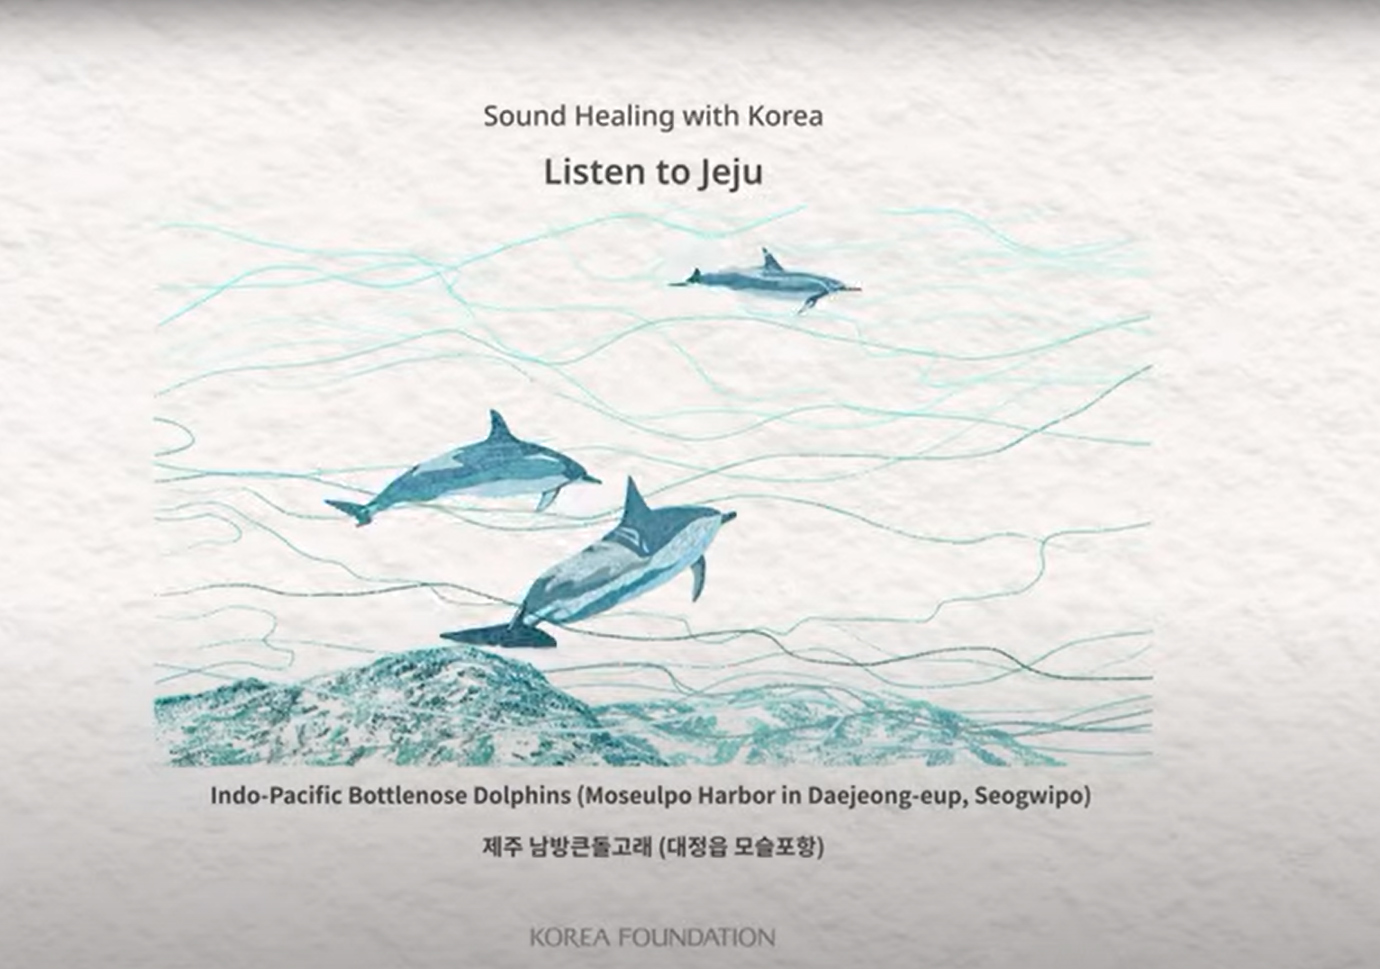 [ASMR] 2021 Sound Healing with Korea - Listen to Jeju | 3. Indo-Pacific Bottlenose Dolphins